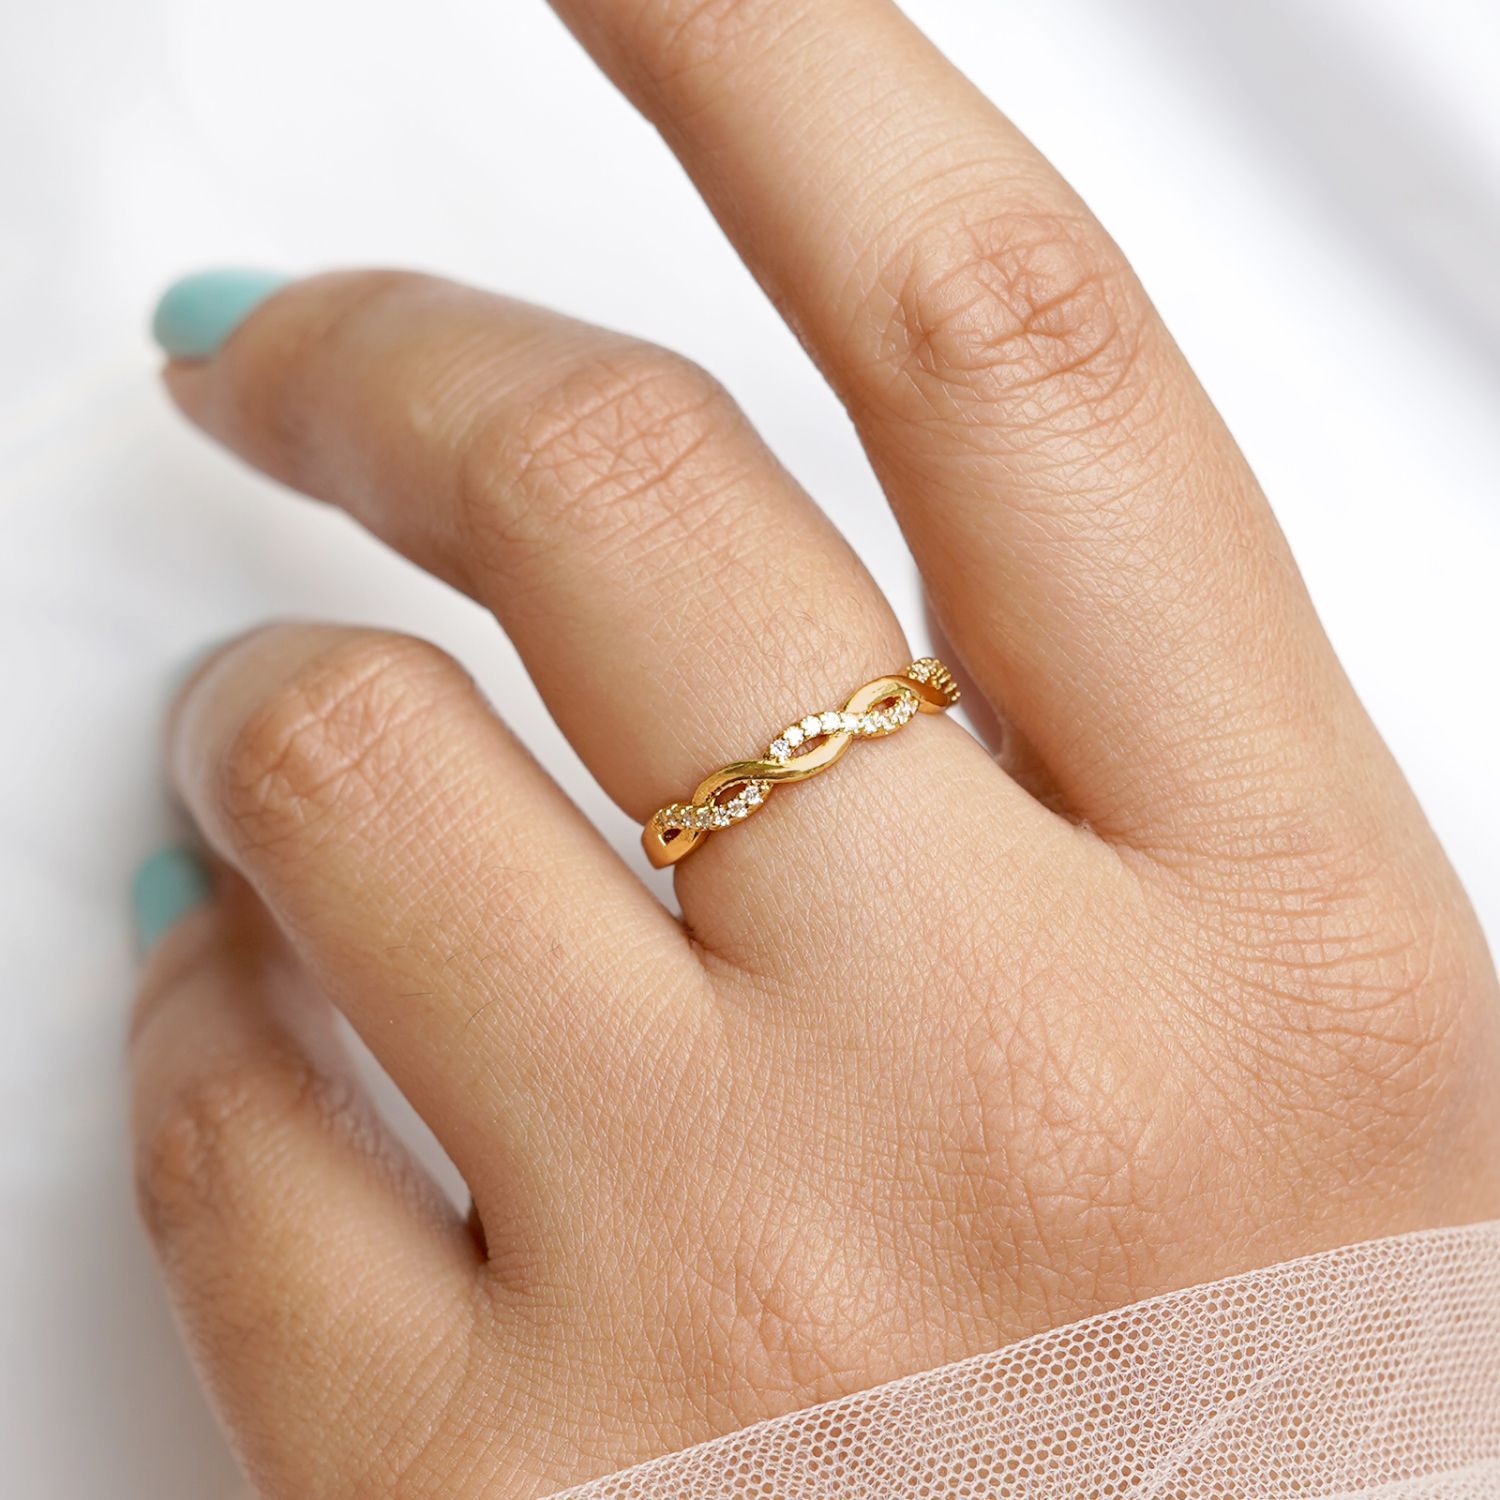 Fashion Design Gold Finger Rings Women Wedding Jewelry Ring Gold Filled Golden  Rings Size 6 7 8 9 R002 - Rings - AliExpress